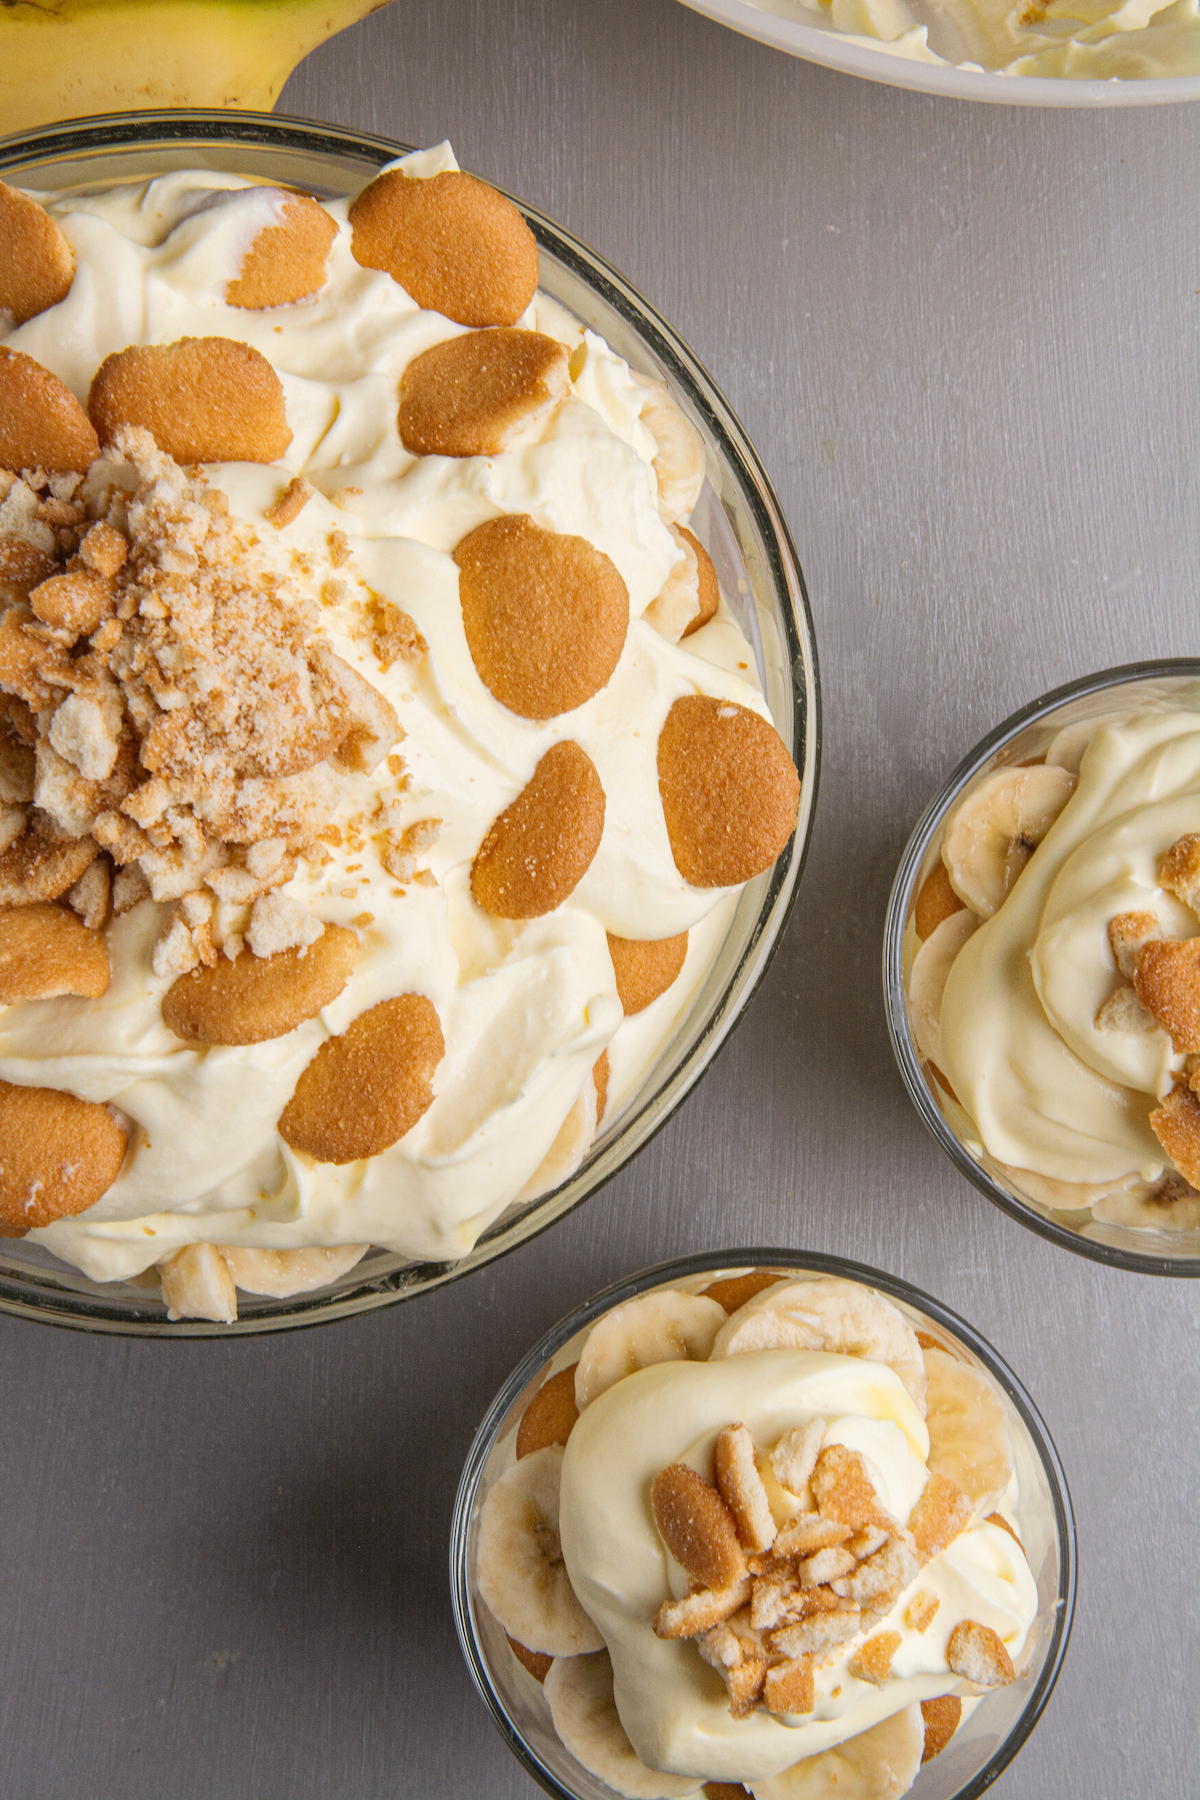 A large bowl and two small glasses filled with banana pudding, topped with Nilla wafer.